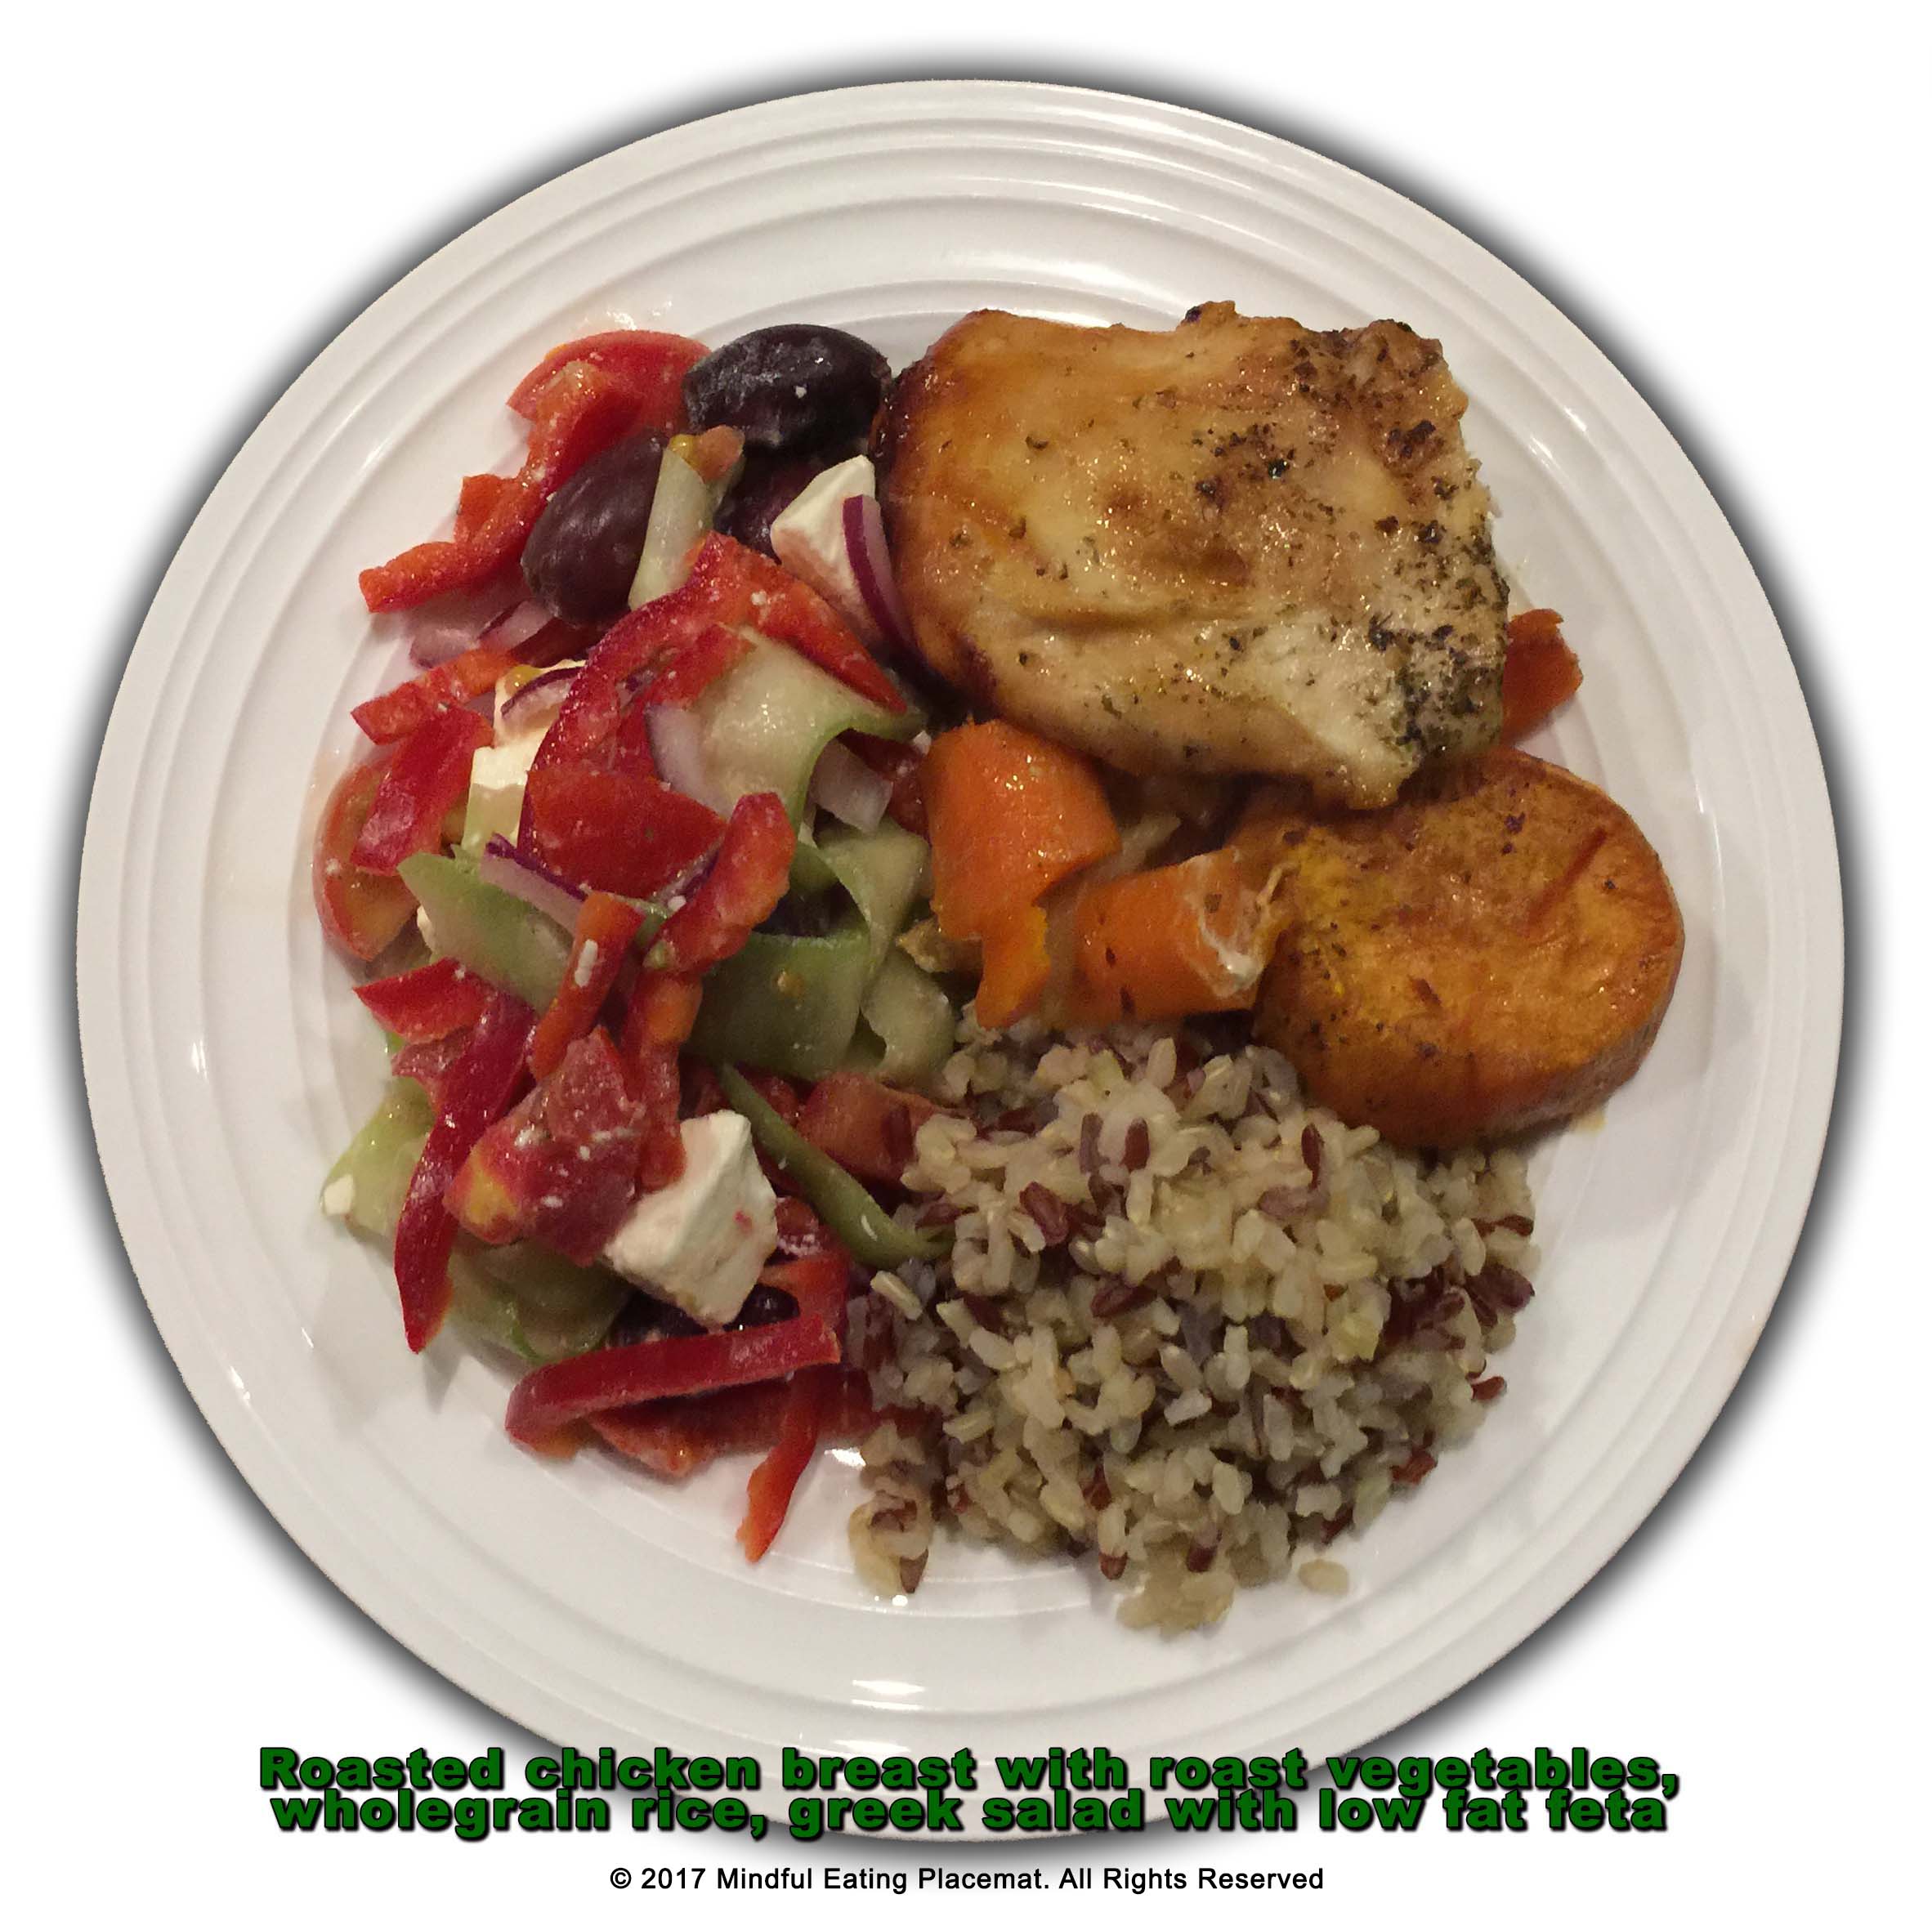 Roasted chicken with veges, rice and greek salad